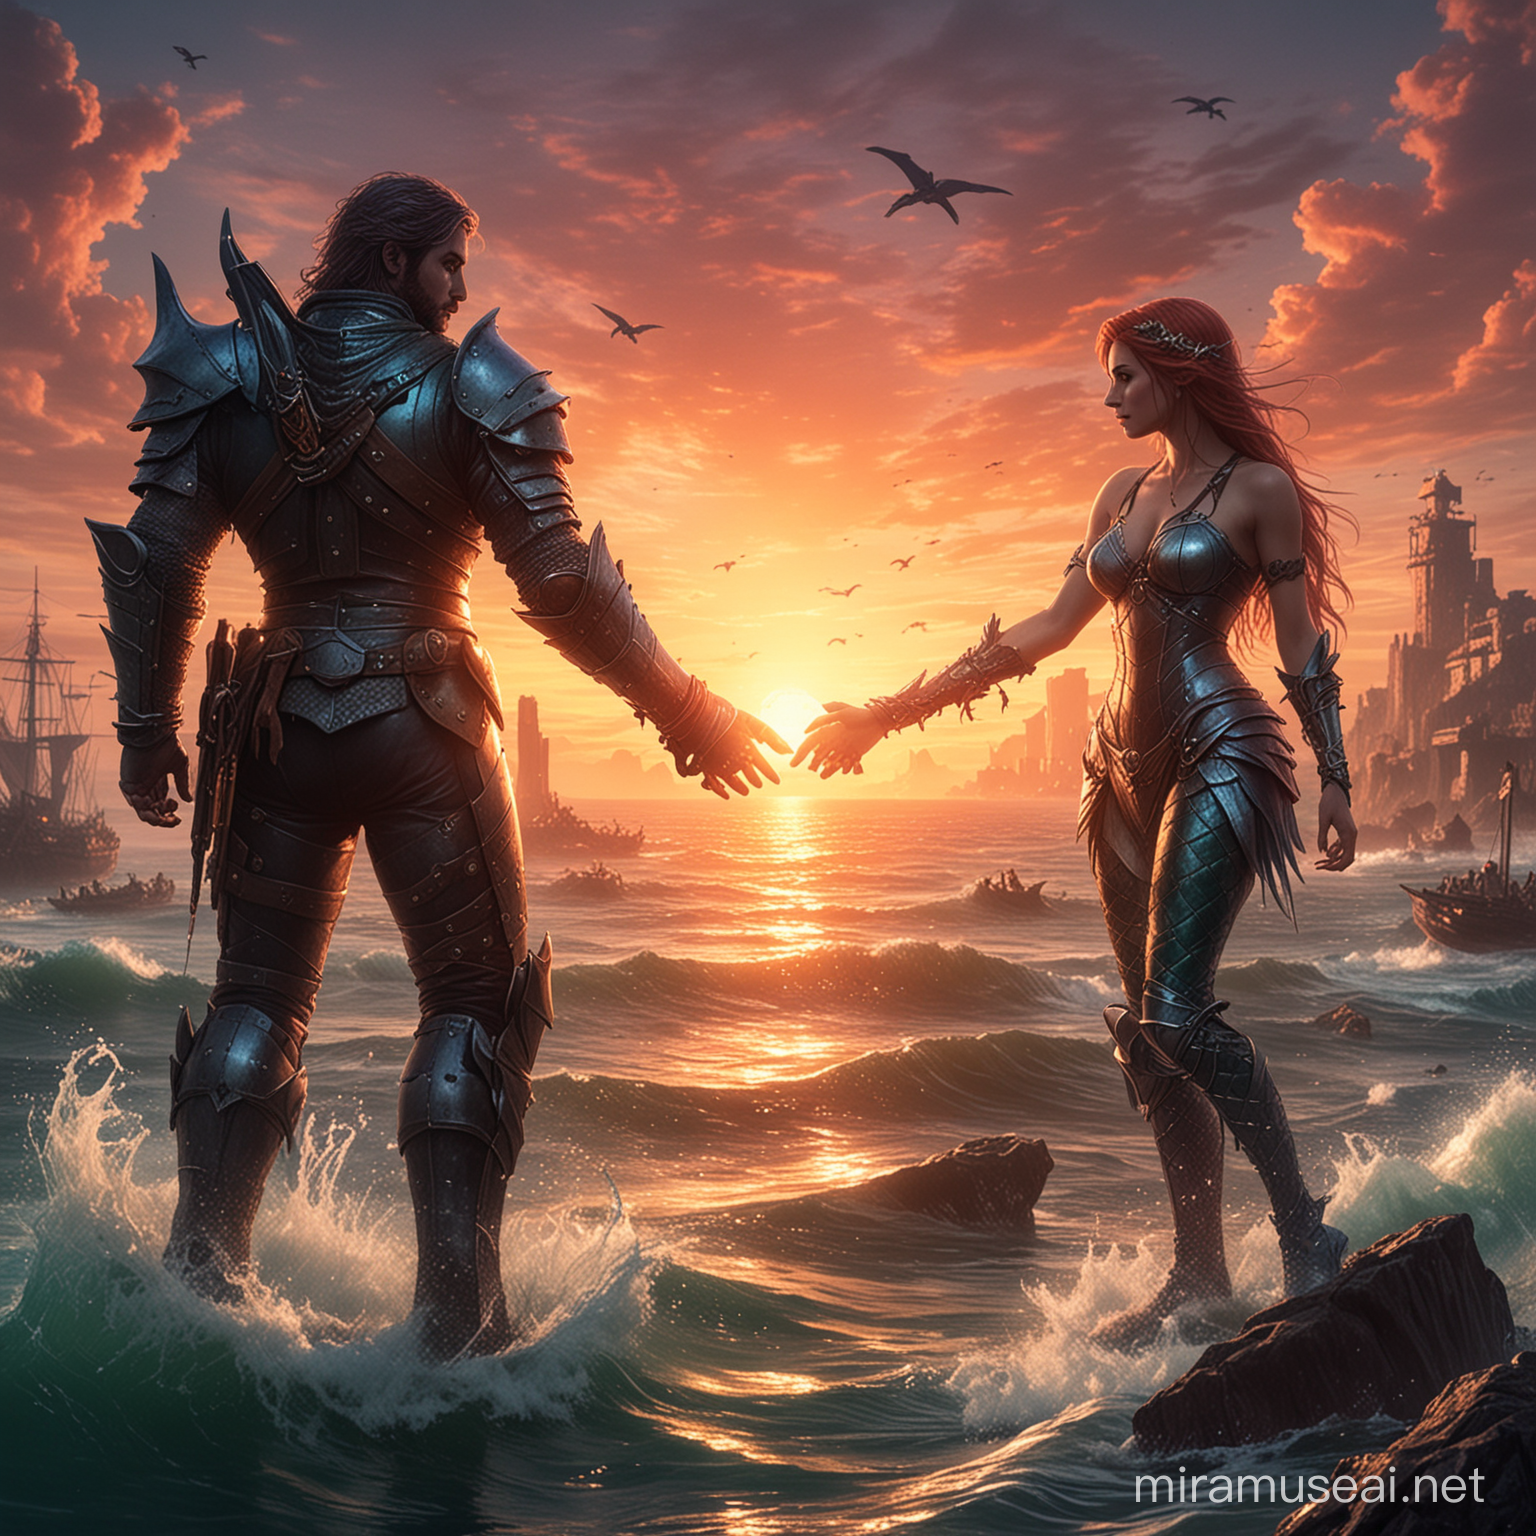 Mermaid and Knight Holding Hands in Apocalyptic Sunset